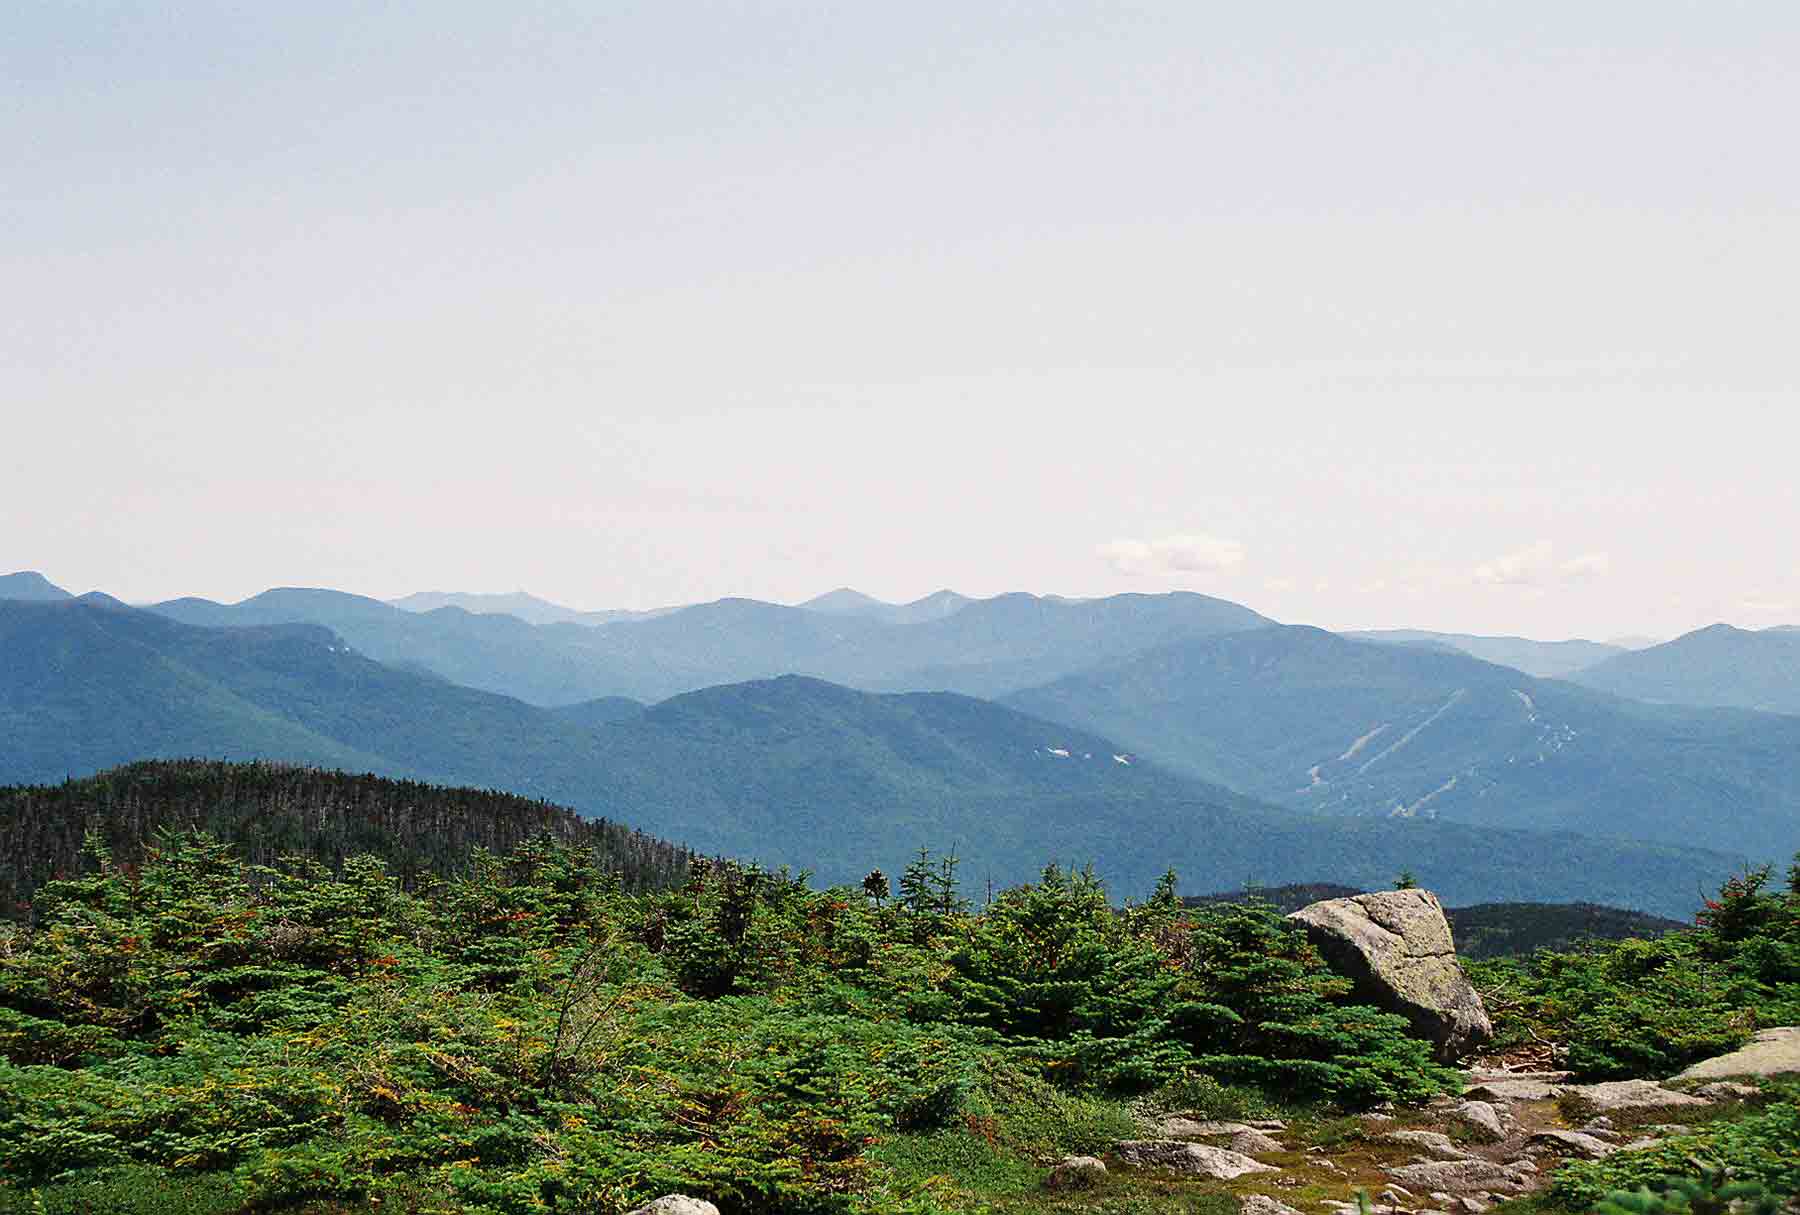 View to the southeast from the summit of South Kinsman. The Loon Mt. Ski Area near Lincoln can be seen on the right.  Courtesy dlcul@conncoll.edu